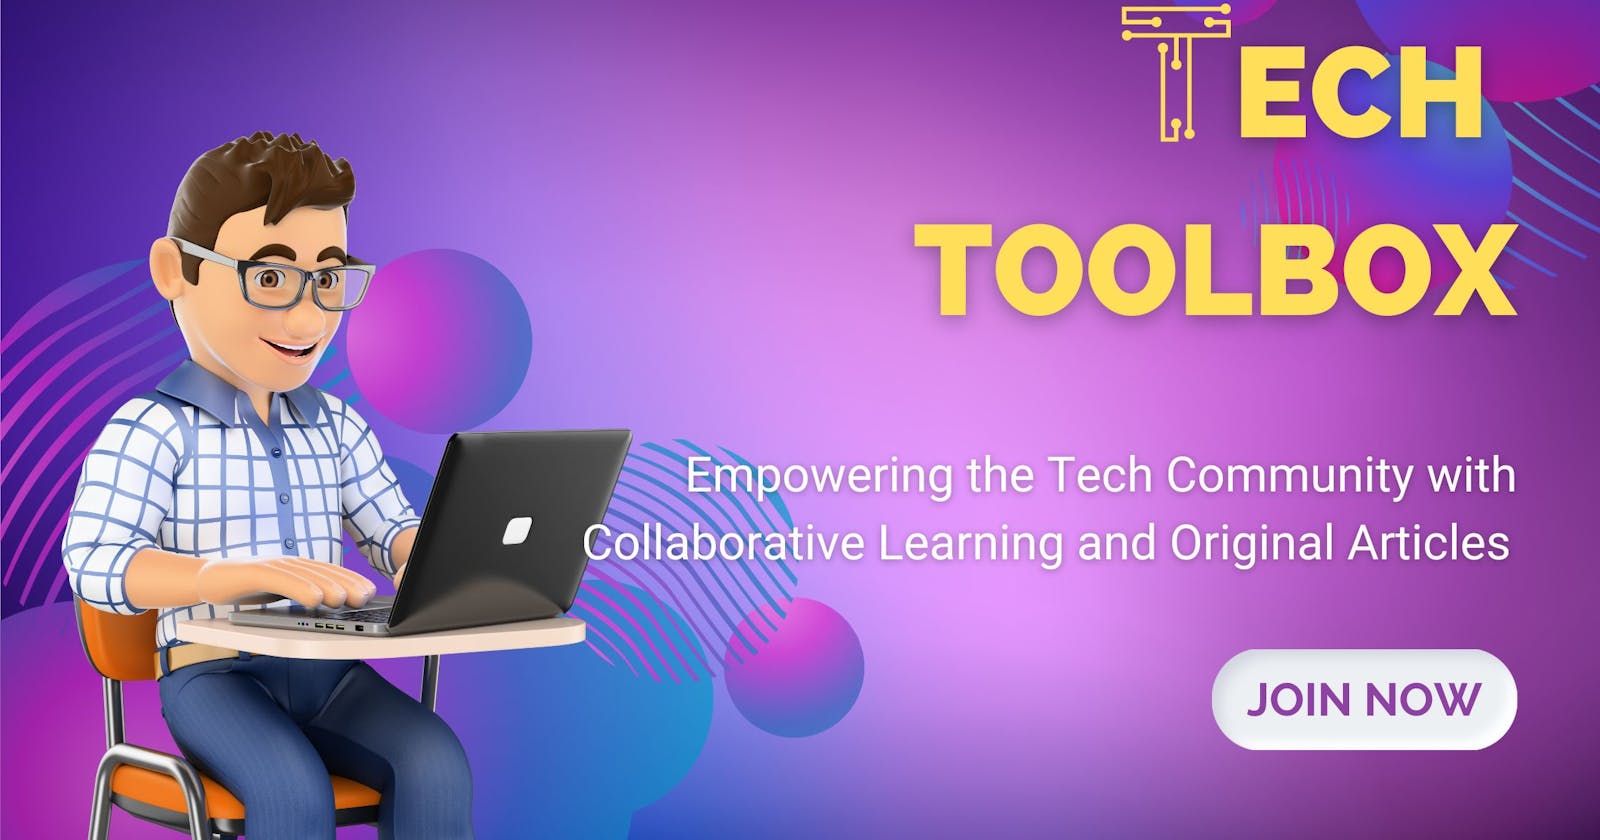 Tech Toolbox: Empowering the Tech Community with Collaborative Learning and Original Articles